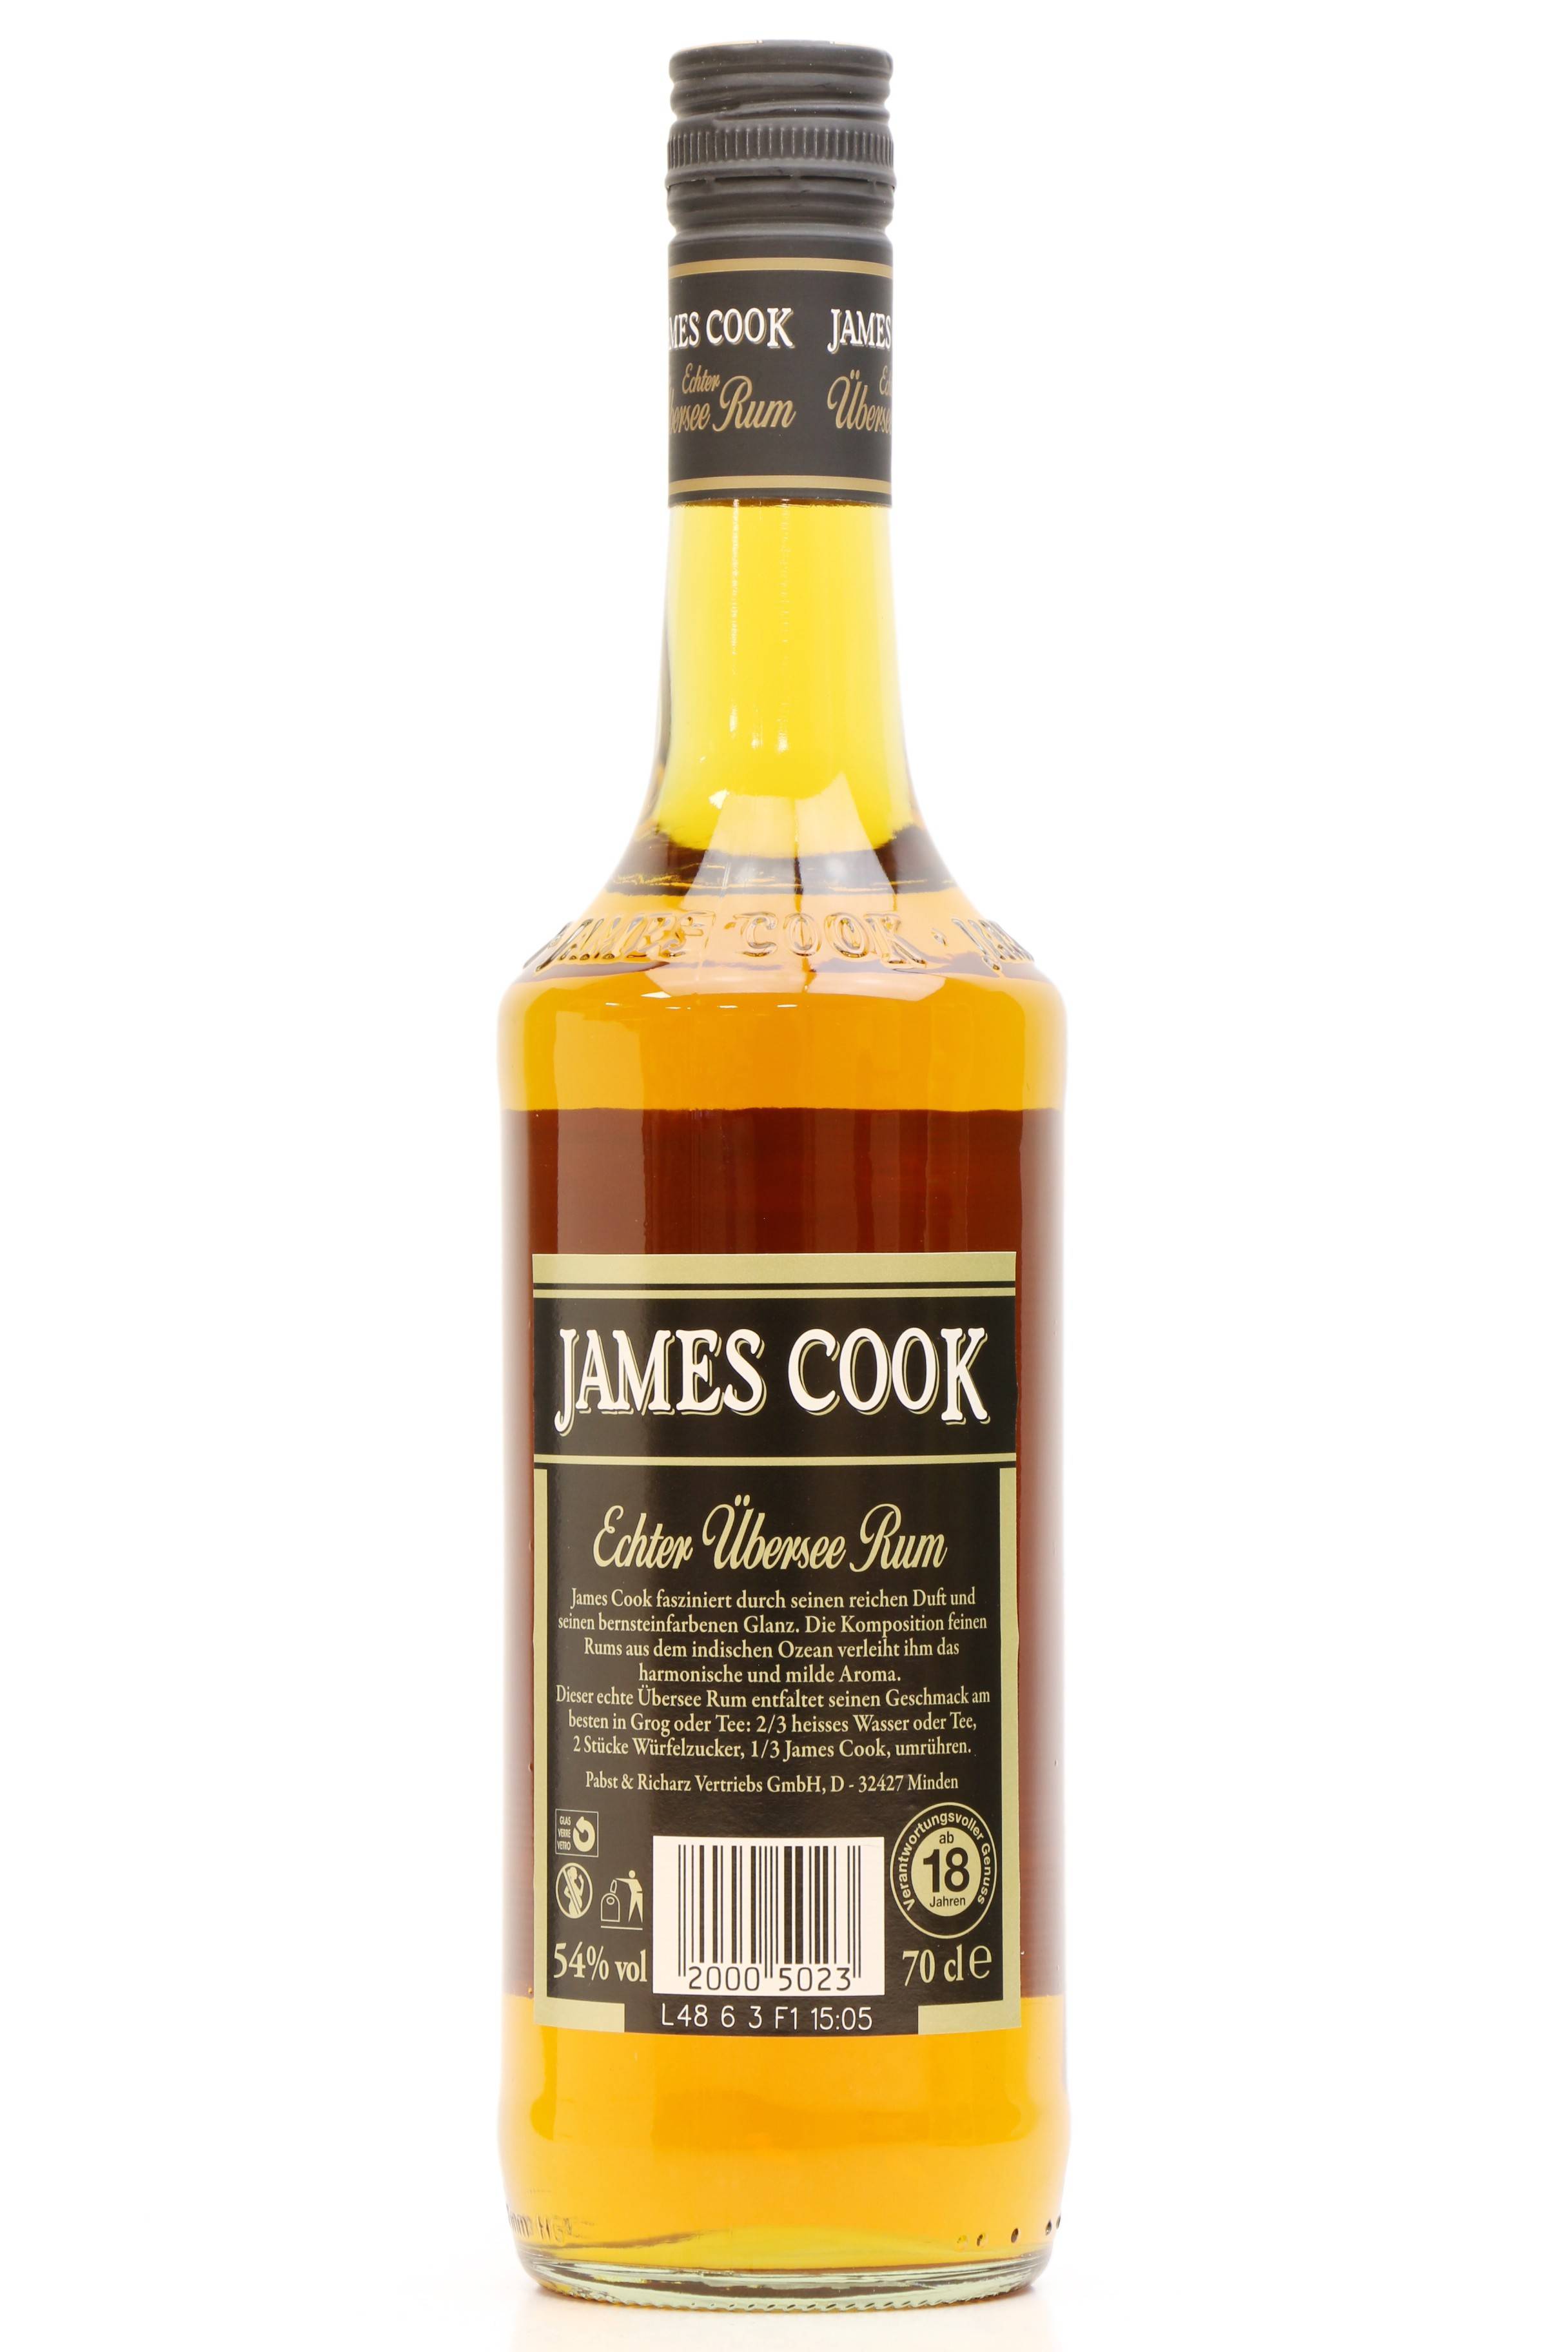 James Cook Echter Ubersee Rum Auctions (54%) Just Whisky 